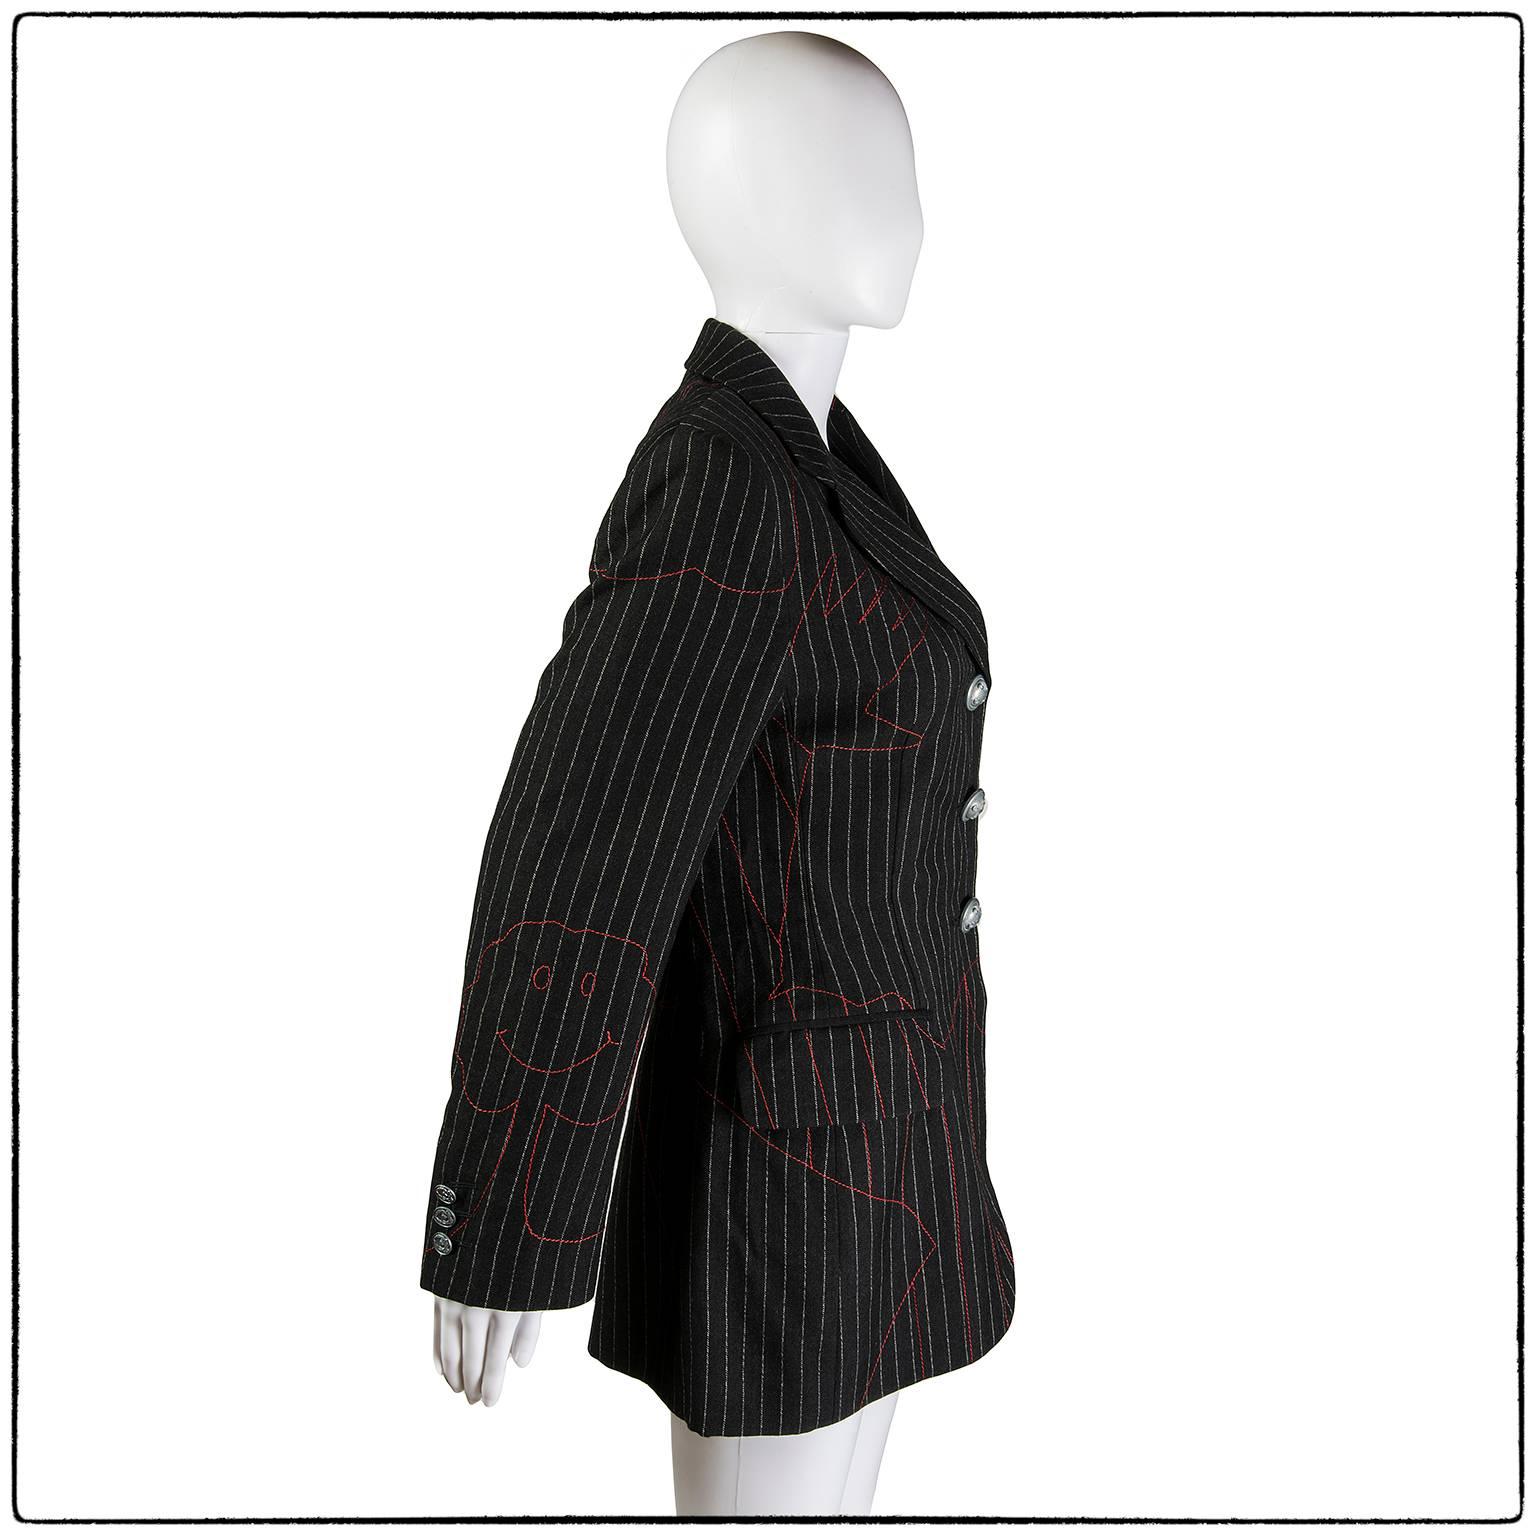 1990s Moschino Cheap And Chic Shadow Profile Print Blazer Jacket In Good Condition For Sale In Rome, IT